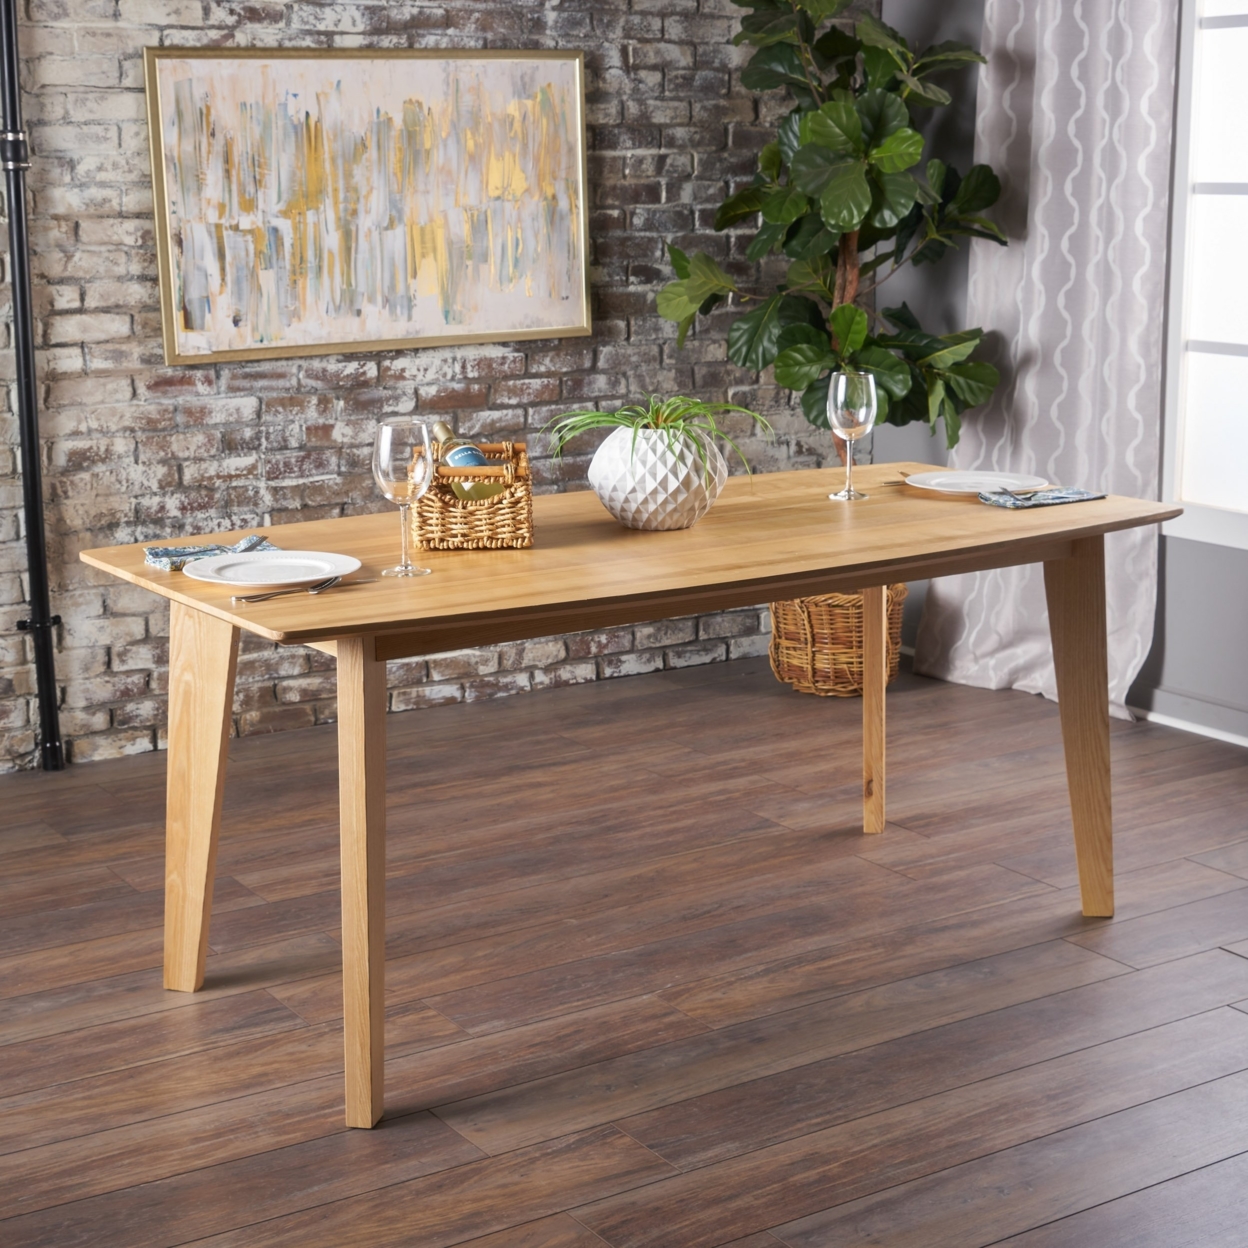 Cassius Neutral Finished Ash Wood Dining Table